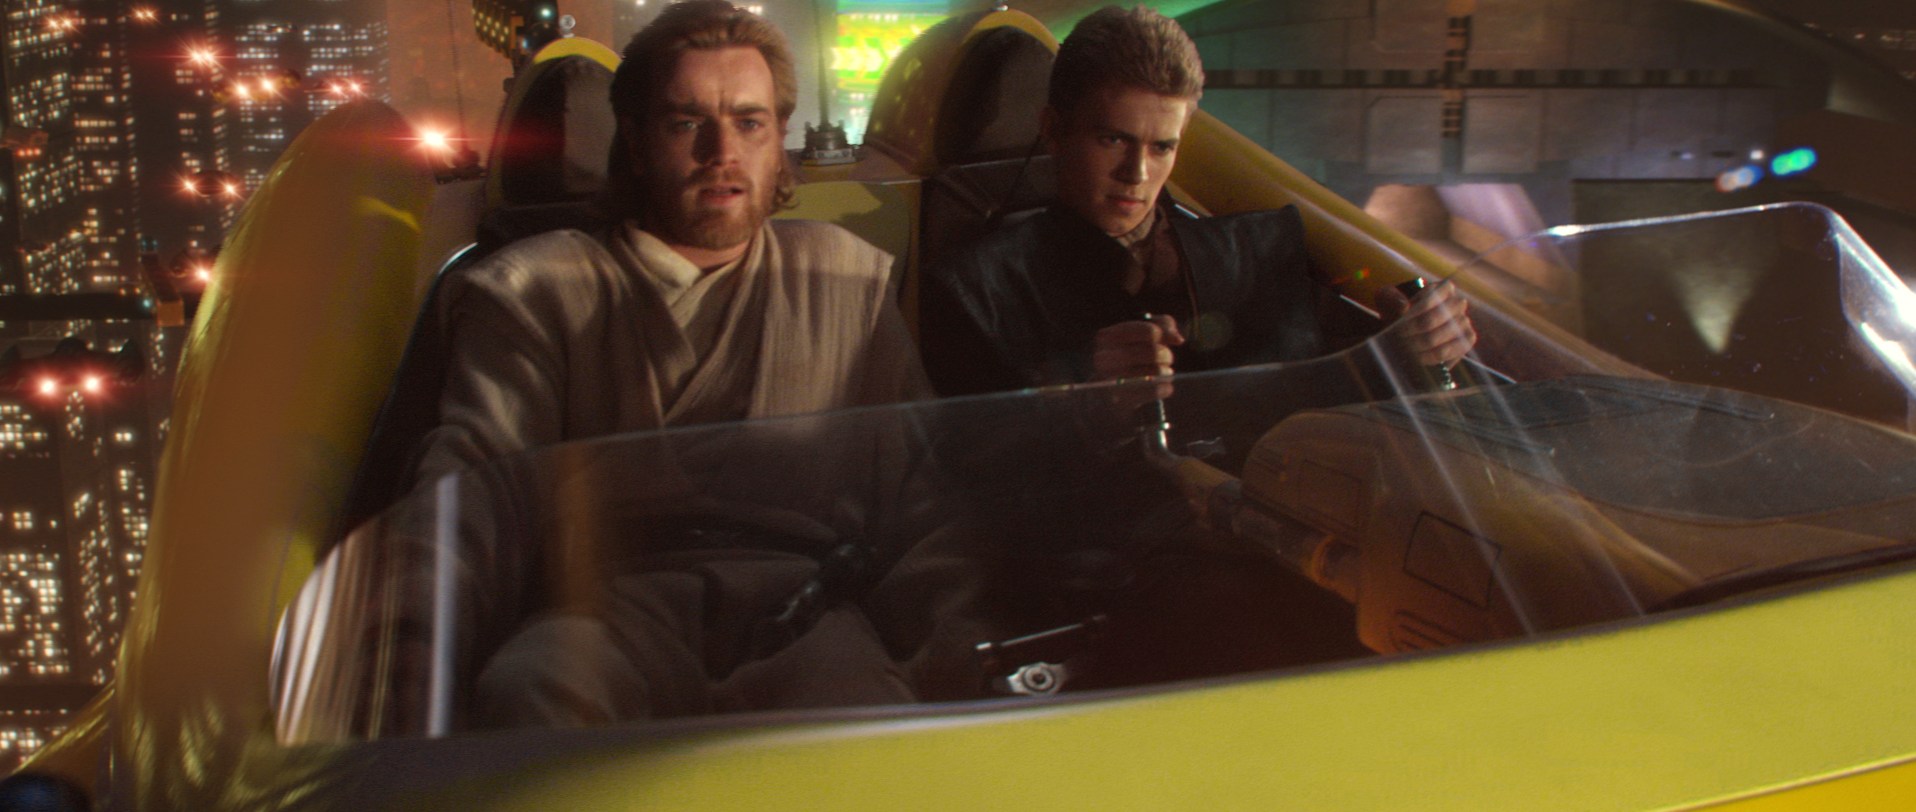 An Honest Look at "Star Wars: Episode II - Attack of the Clones"